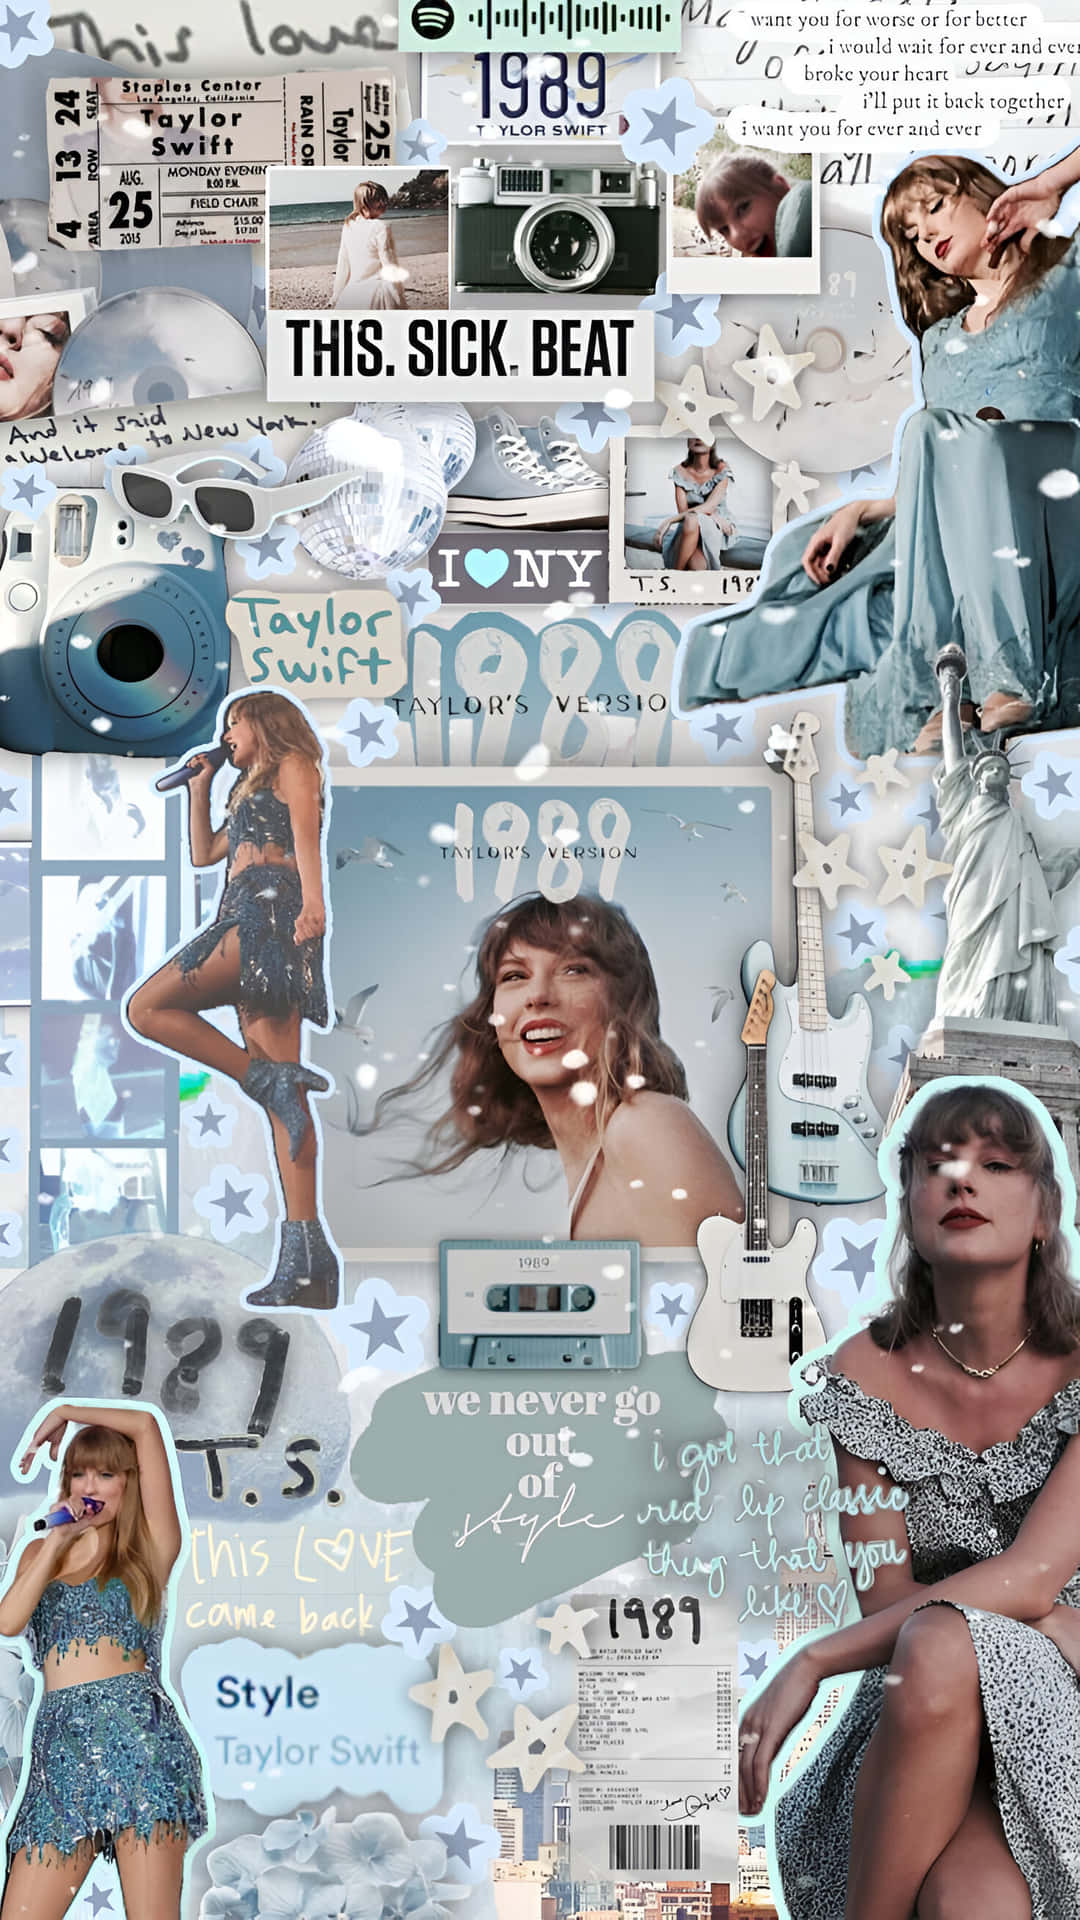 Taylor Swift1989 Collage Wallpaper